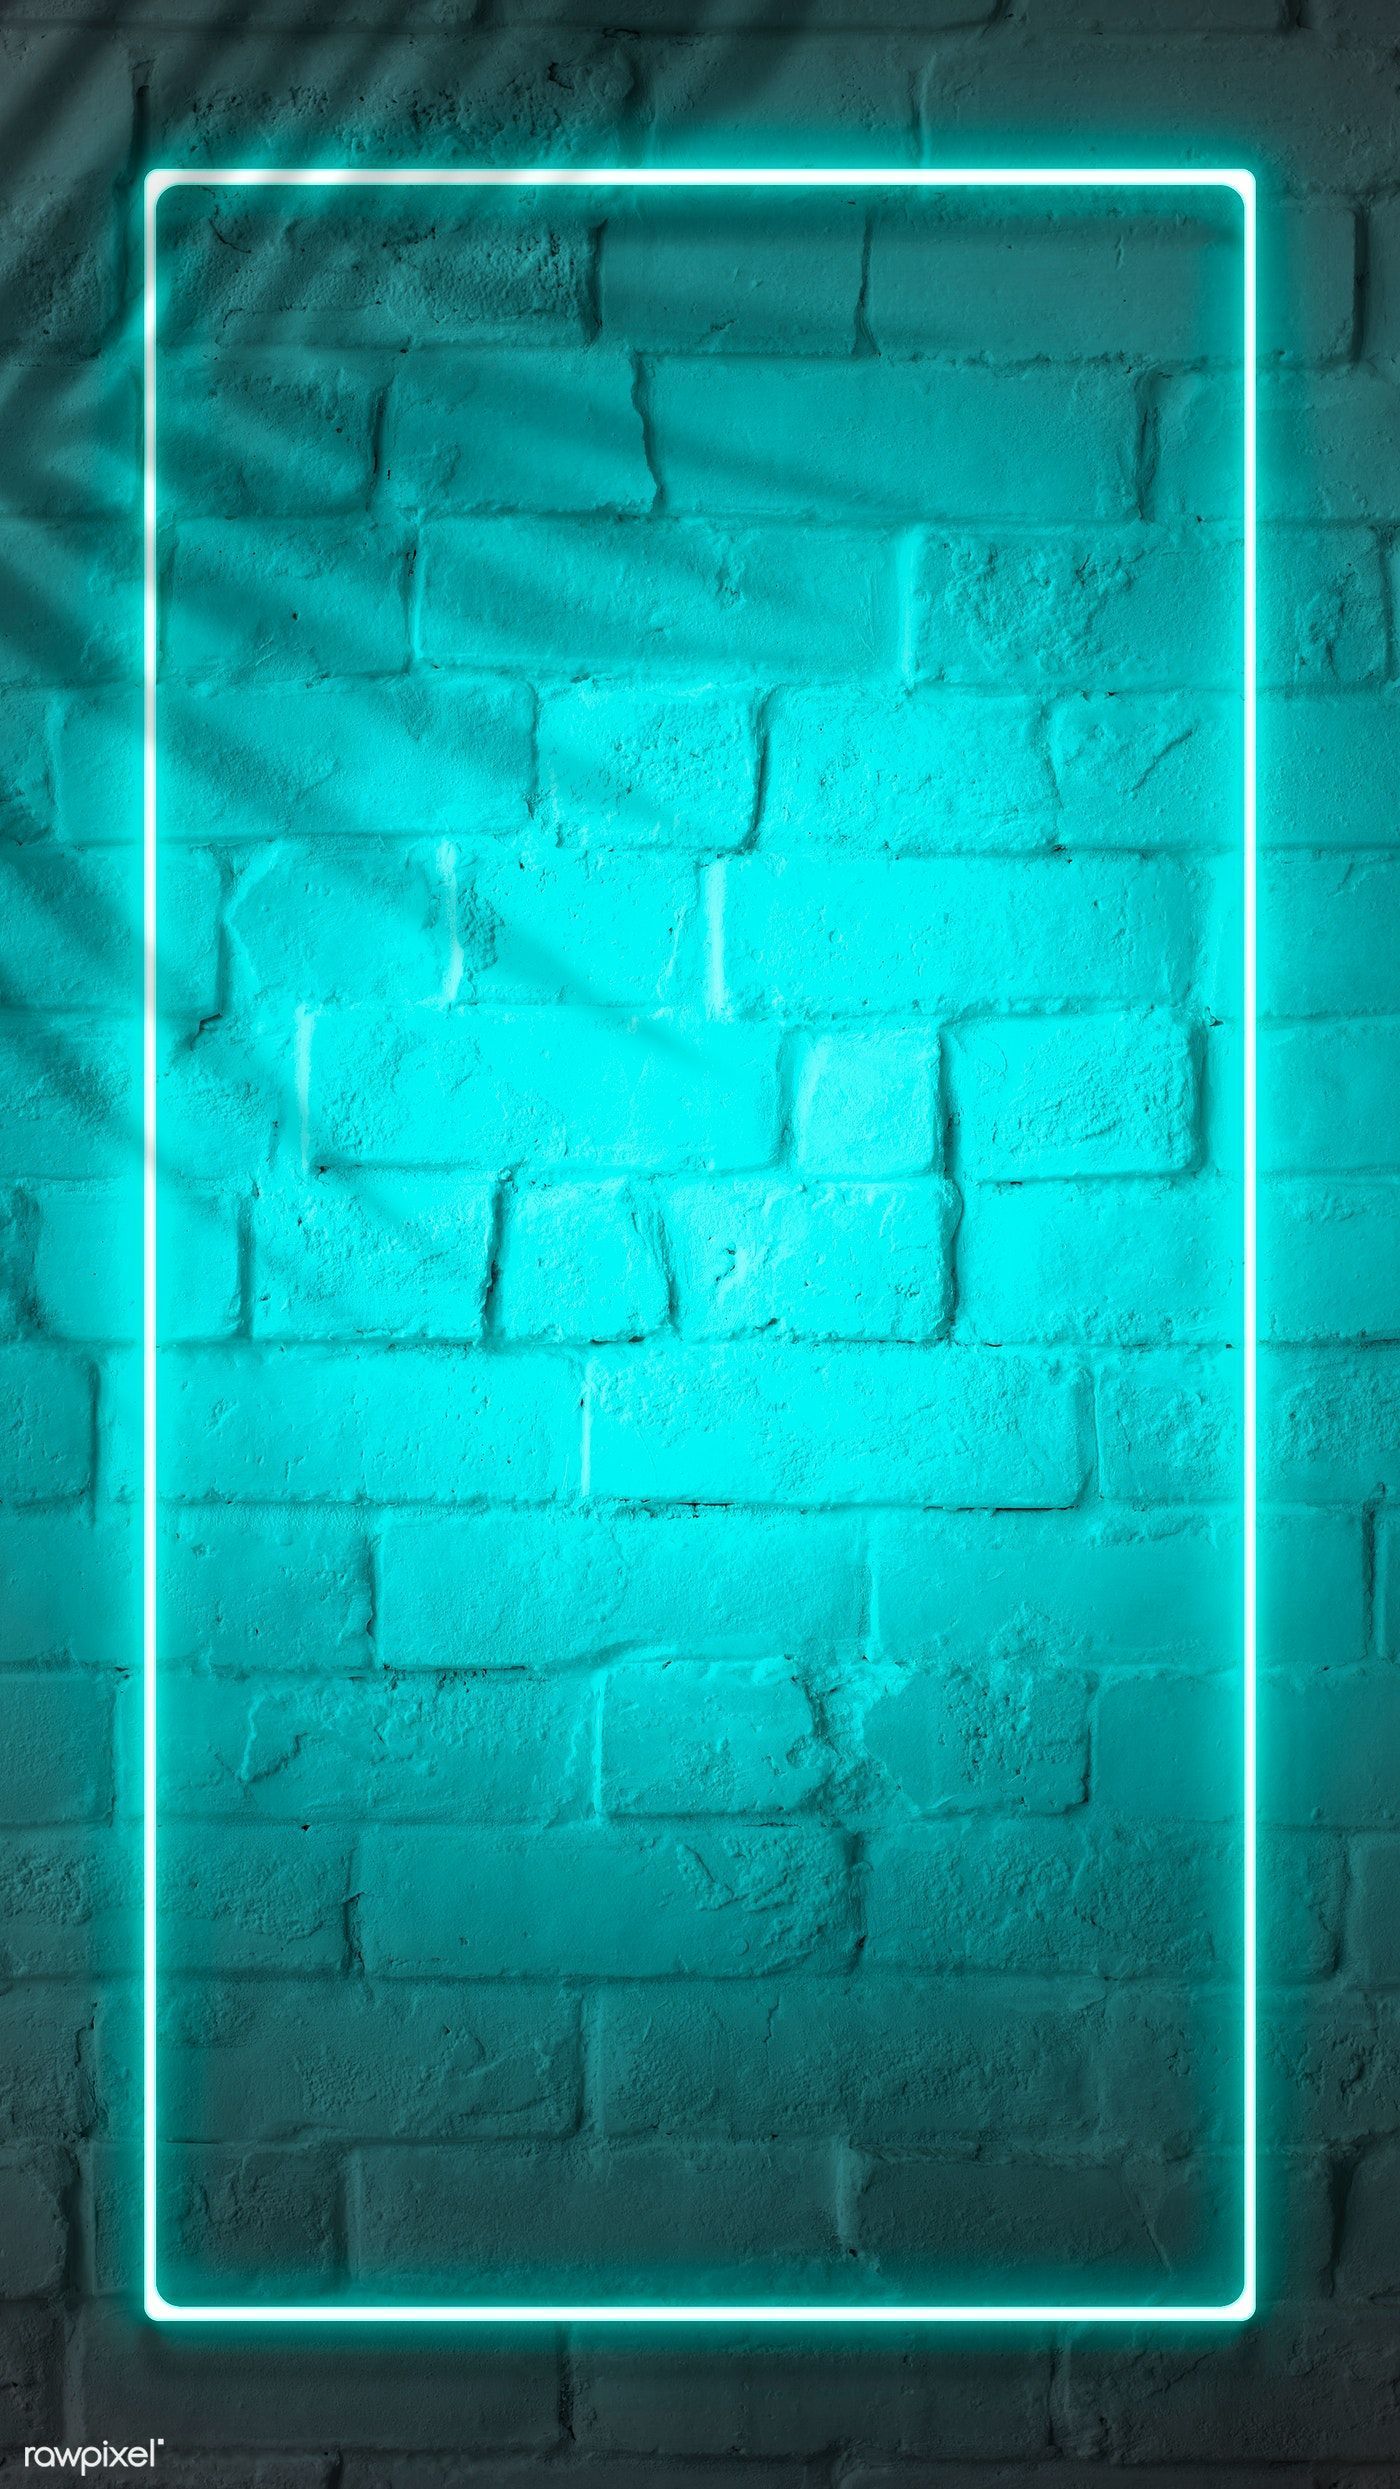 A neon green frame on top of brick wall - Turquoise